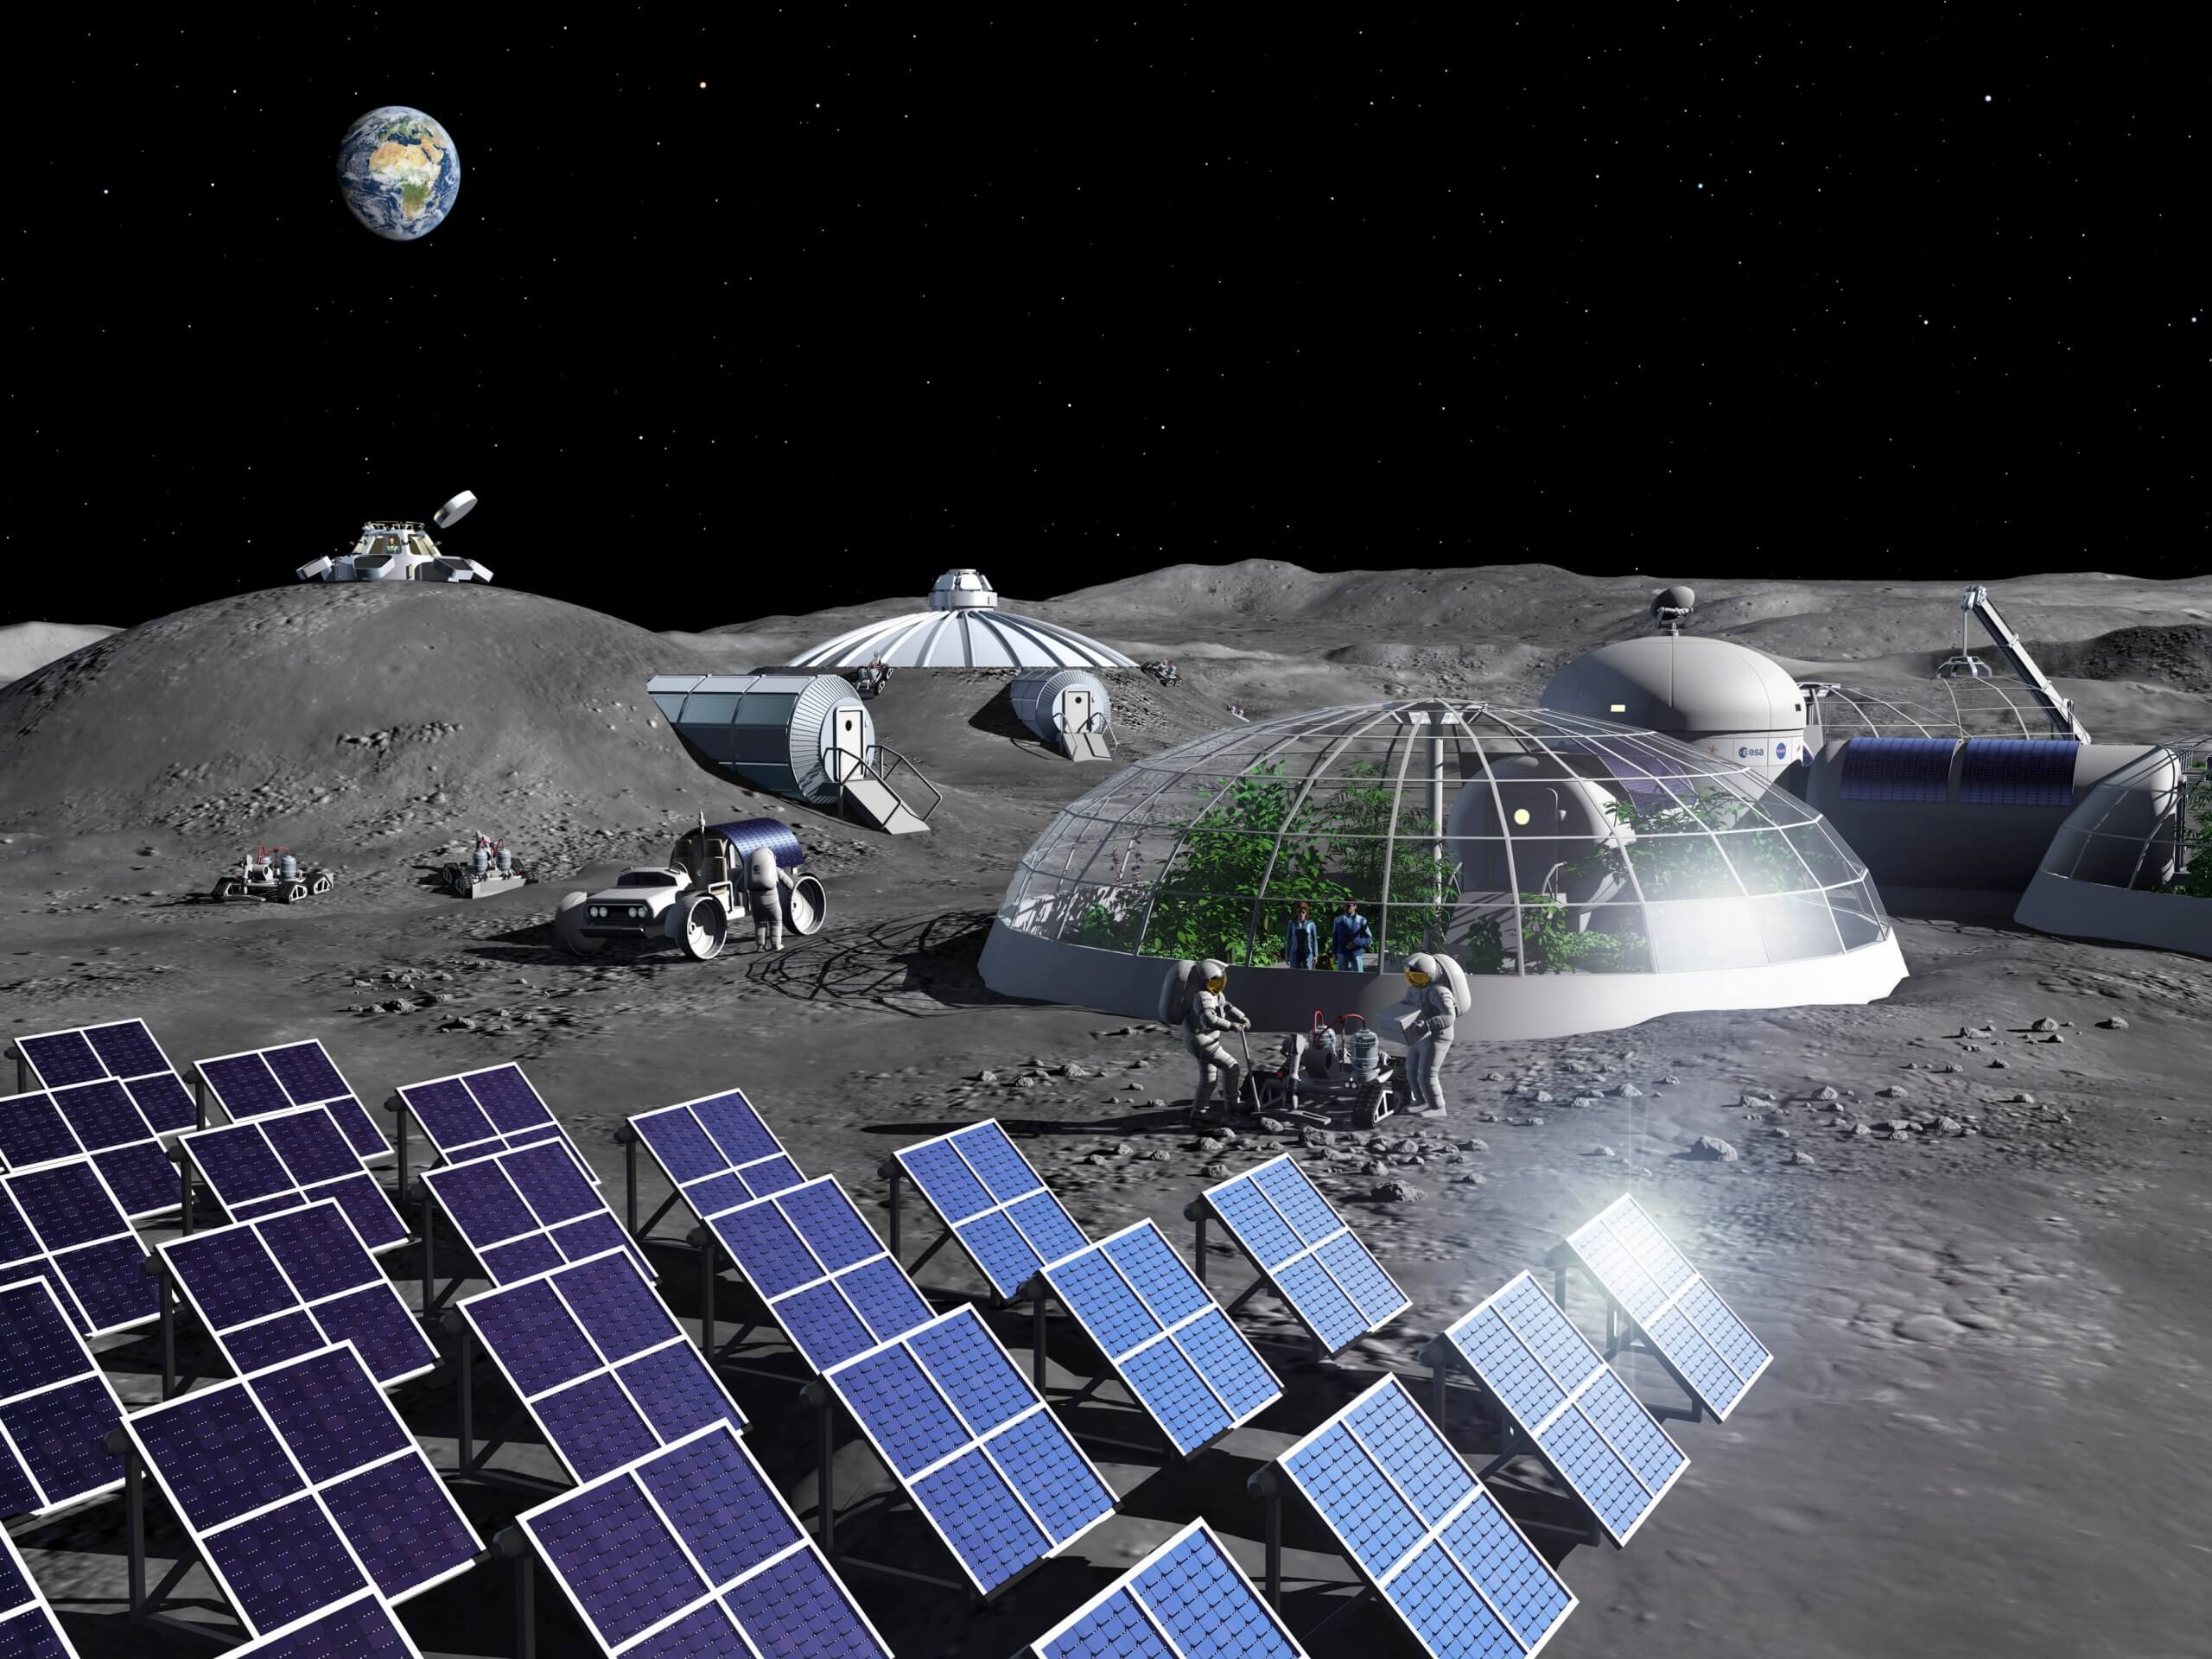 ESA researchers built a plant that can extract oxygen from the moon